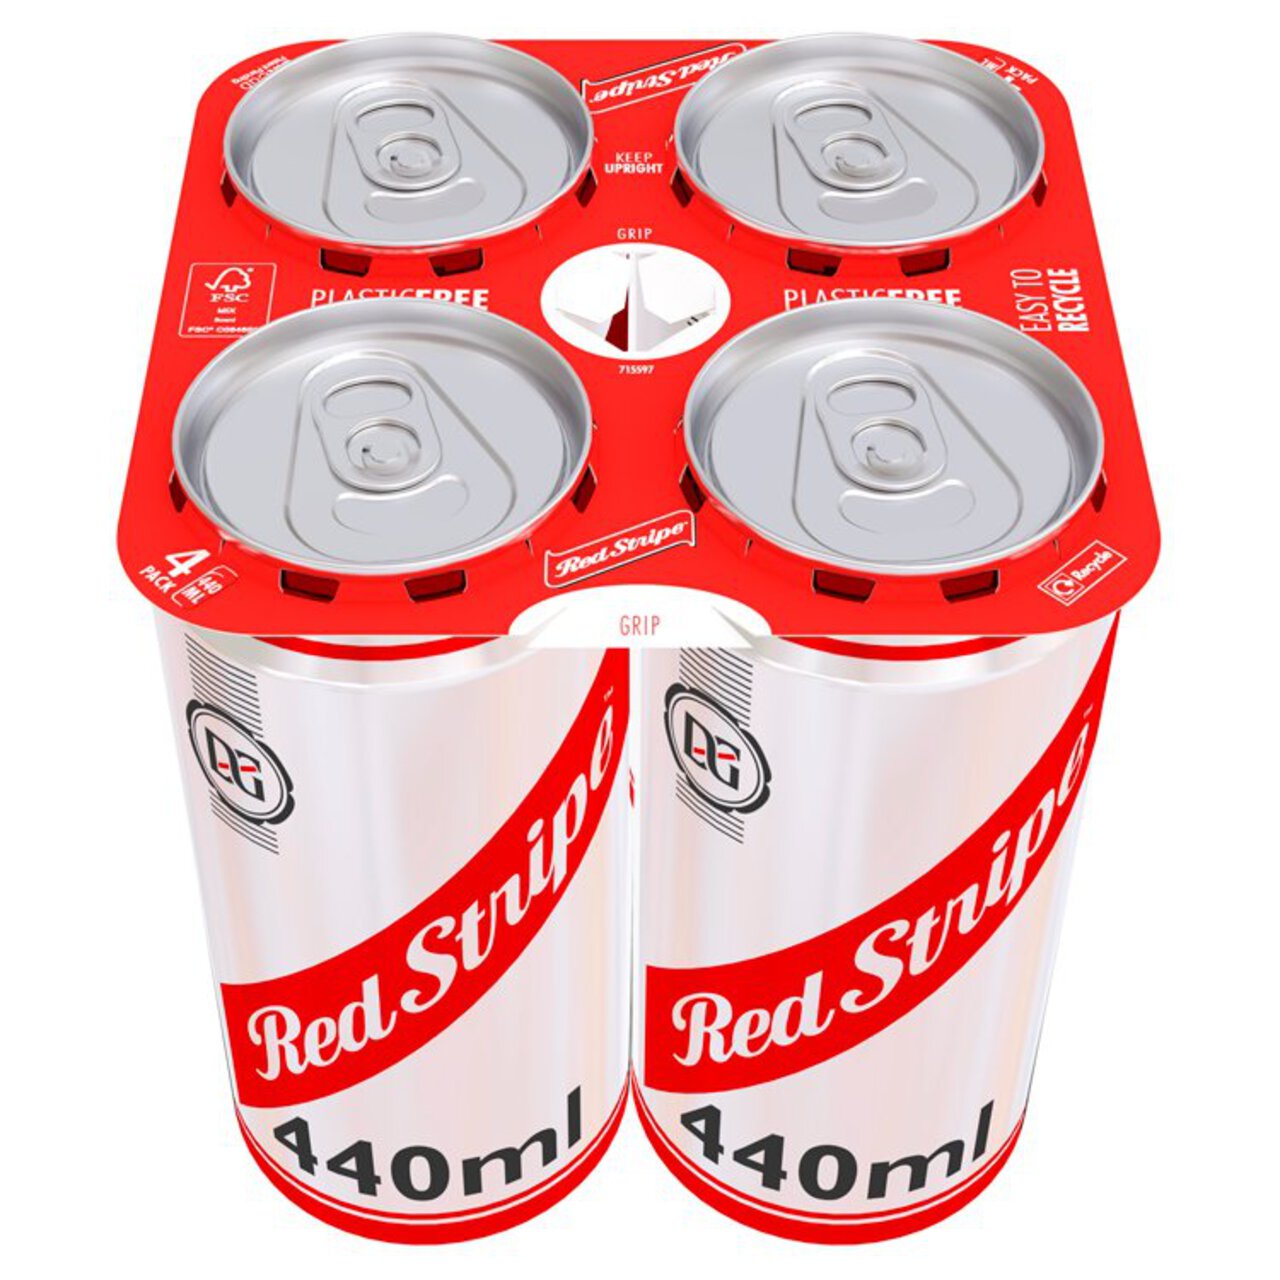 Red Stripe Jamaican Lager Beer Cans 4 x 440ml